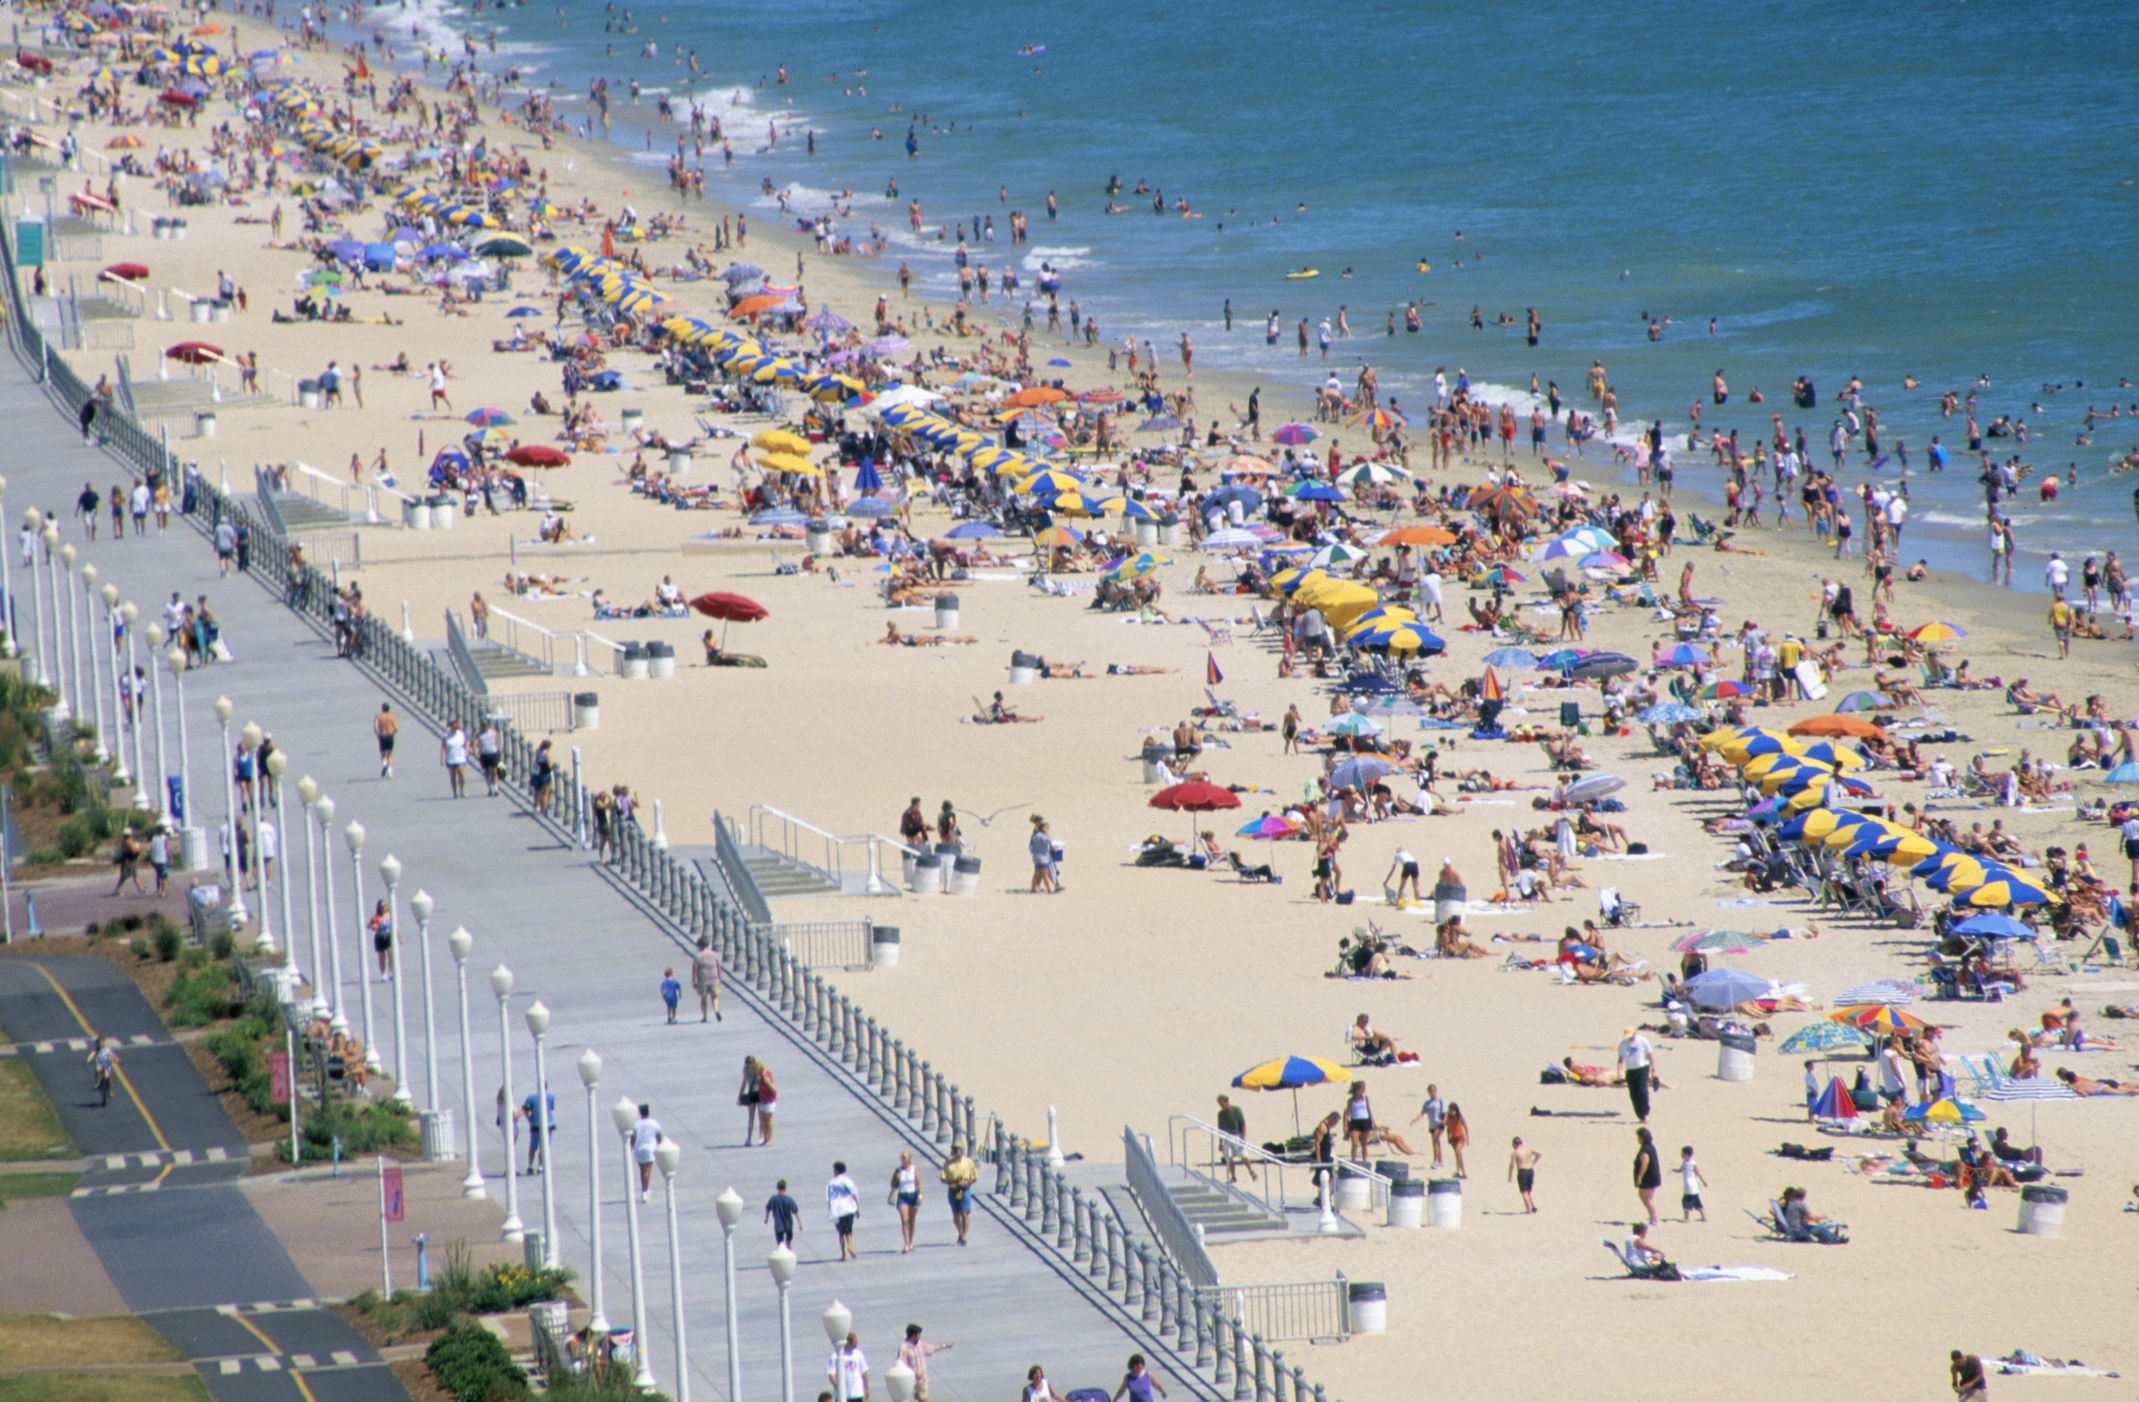 Crowded beach with people sunbathing and umbrellas, adjacent to a walkway